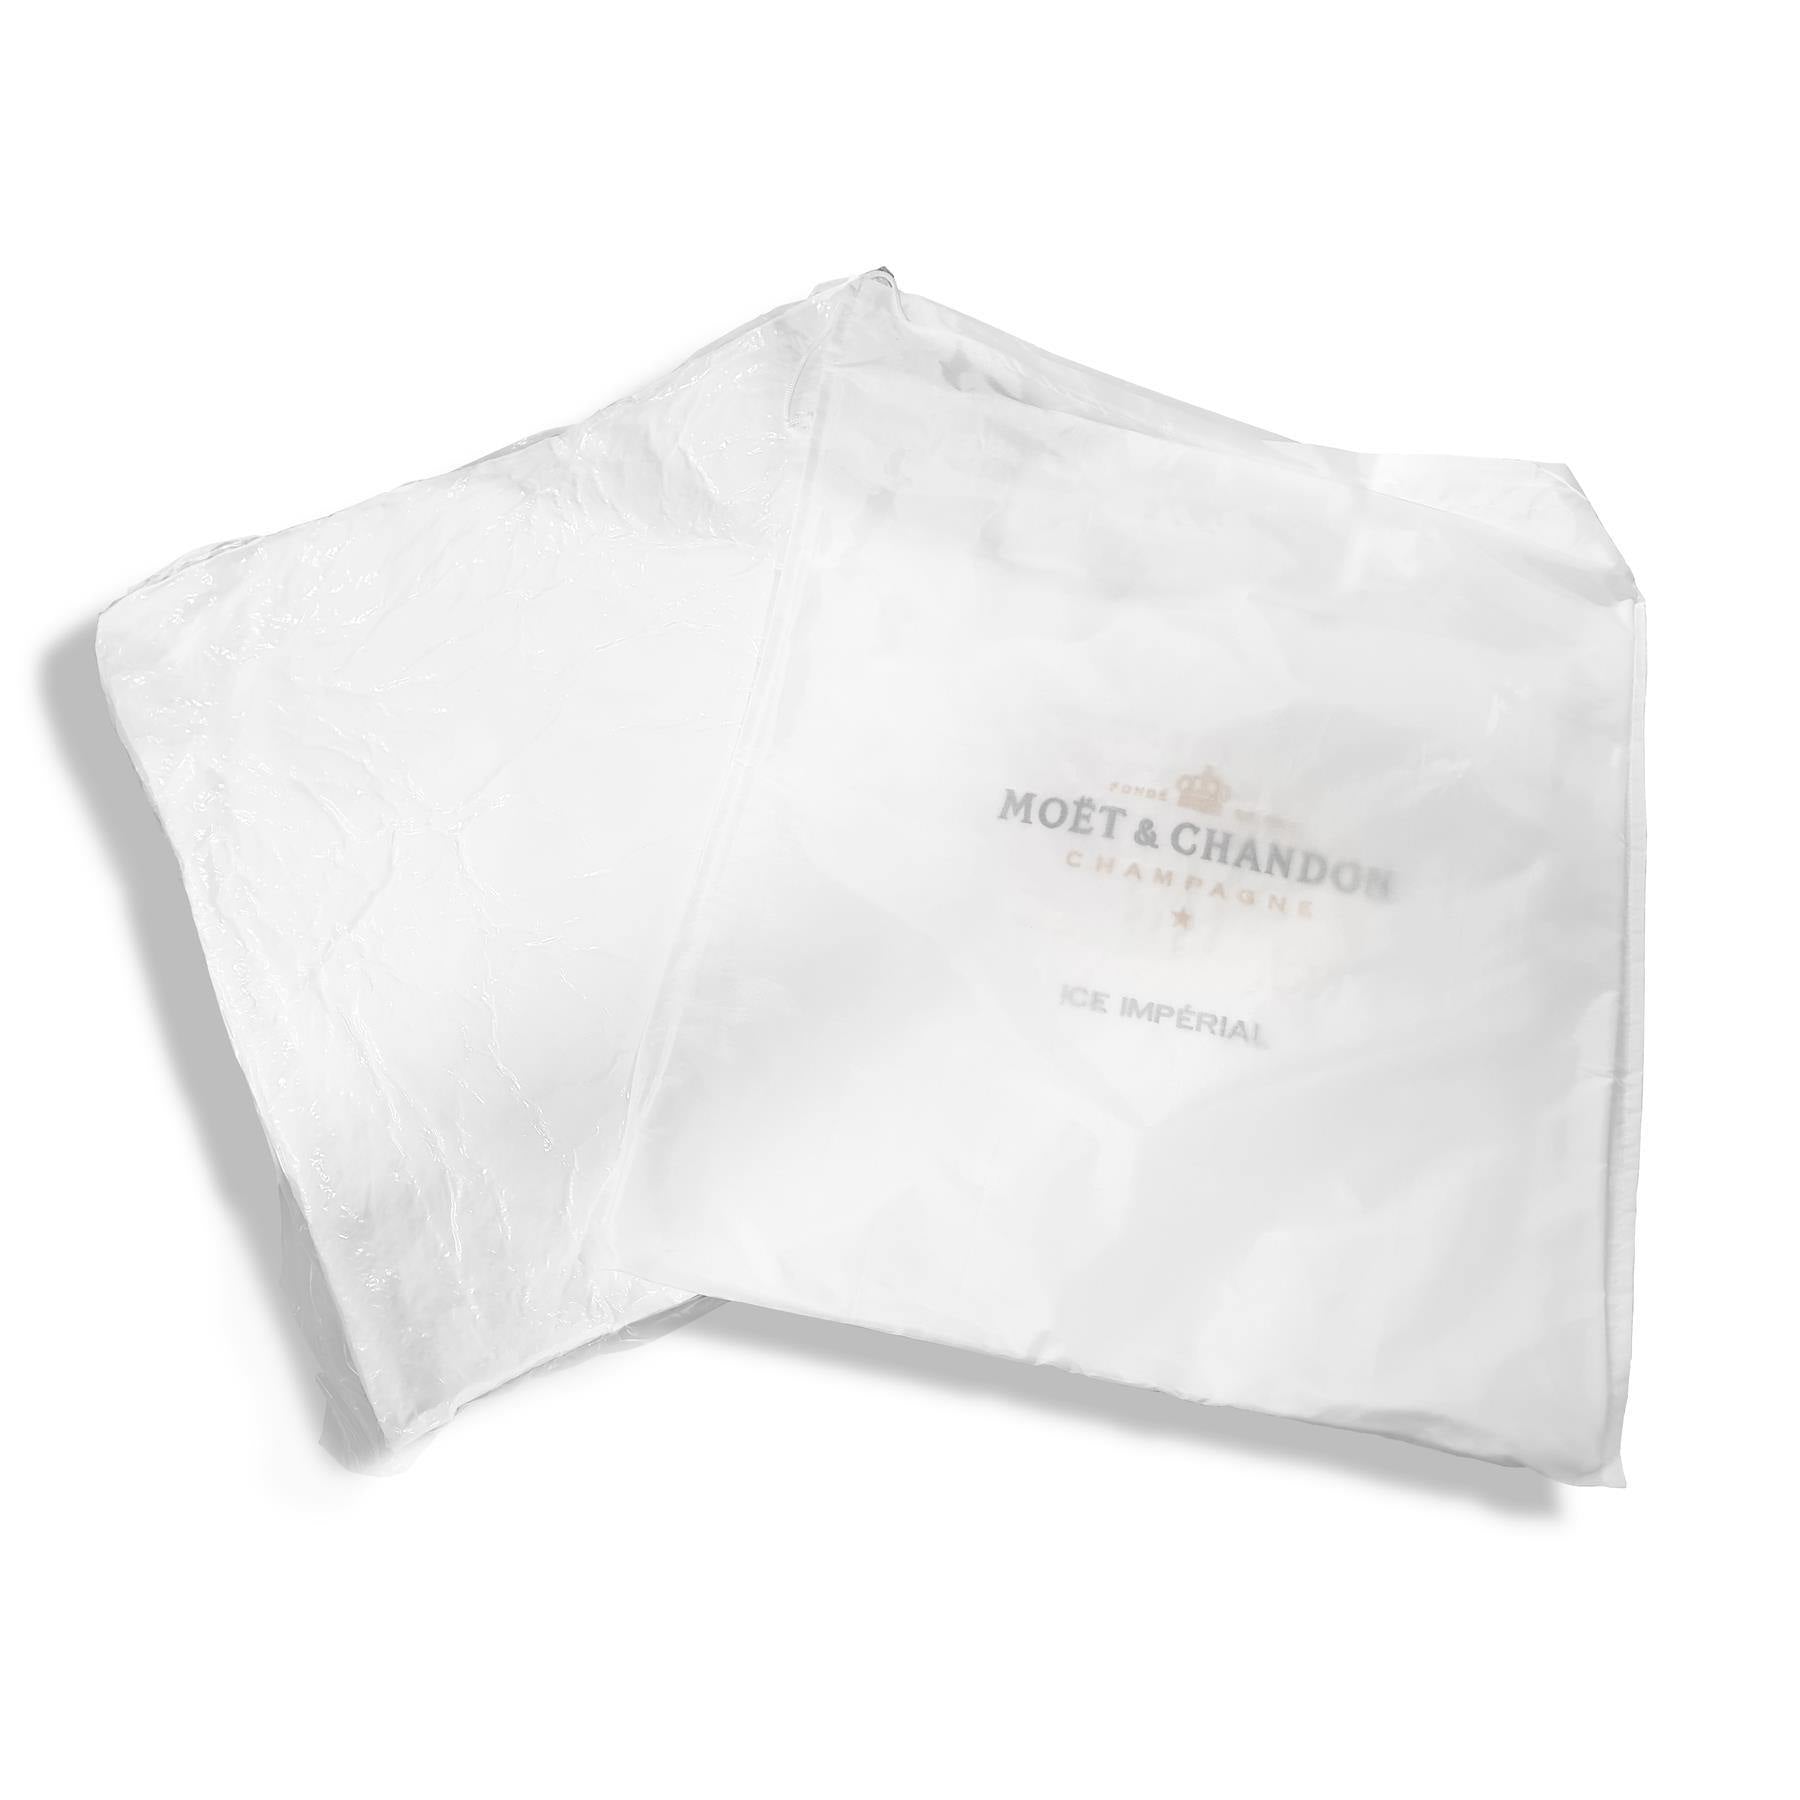 Moet One Pillows Cushion Cover White Outdoor Champagne Chandon Ice Imperial  : : Home & Kitchen